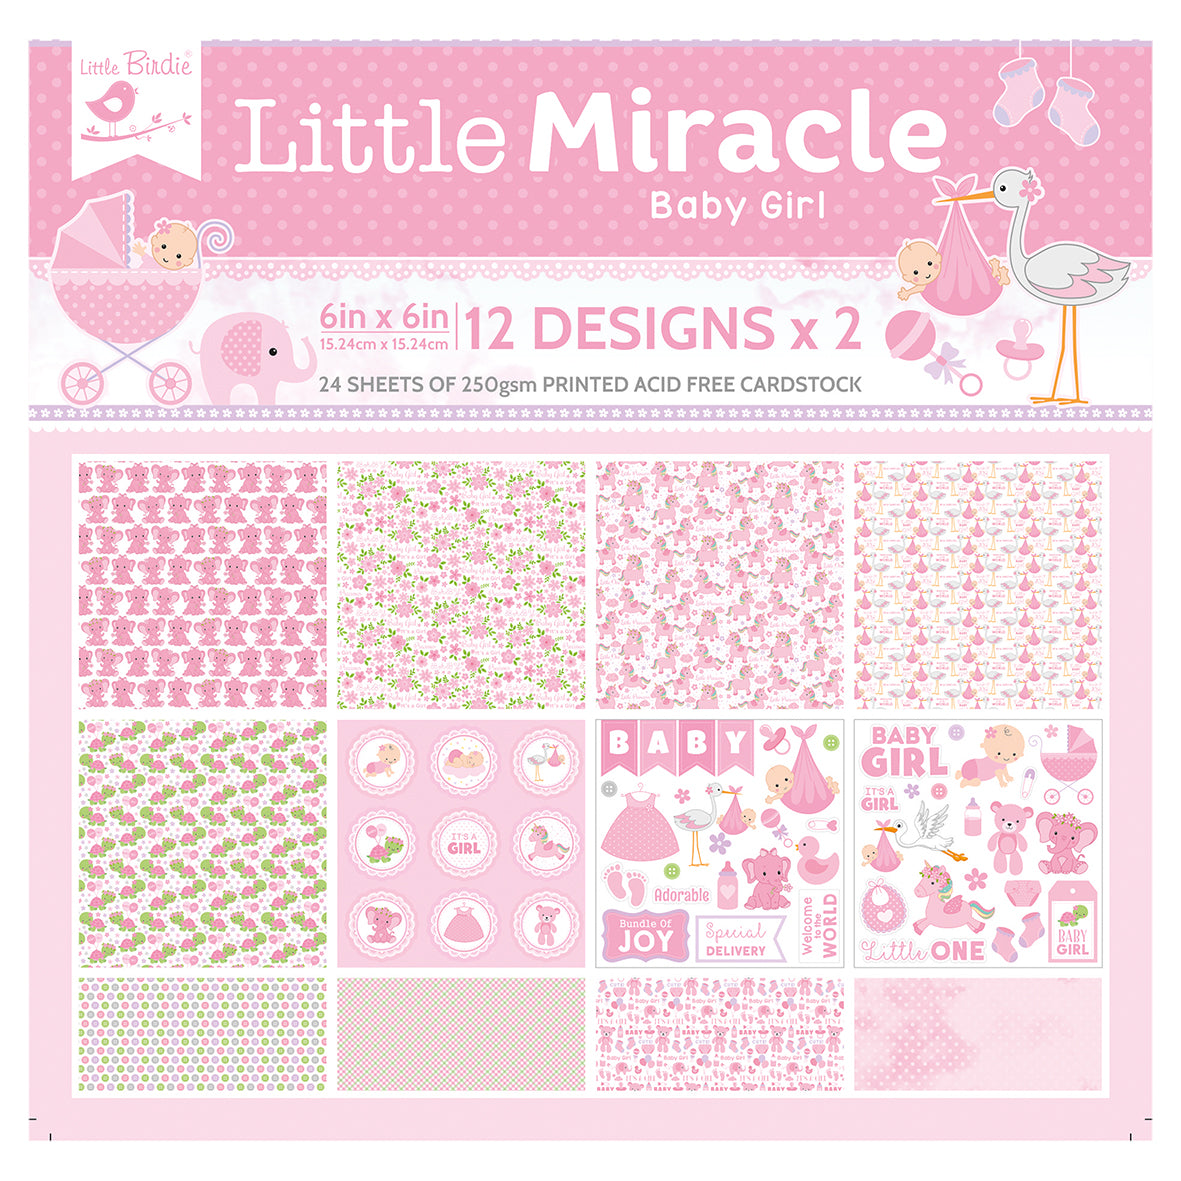 6 x 6 inch Printed Cardstock pack- Little Miracle Baby Girl, 24 Sheets, 12 Designs, 250 gsm